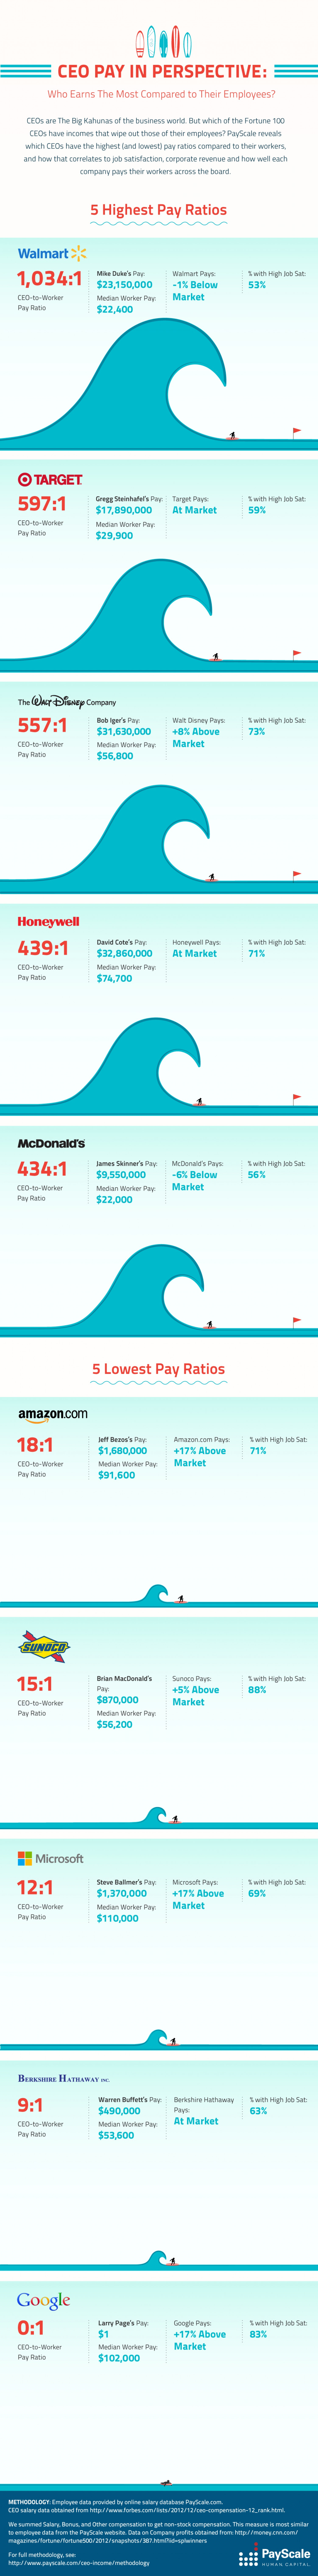 16. CEO Pay in Perspective